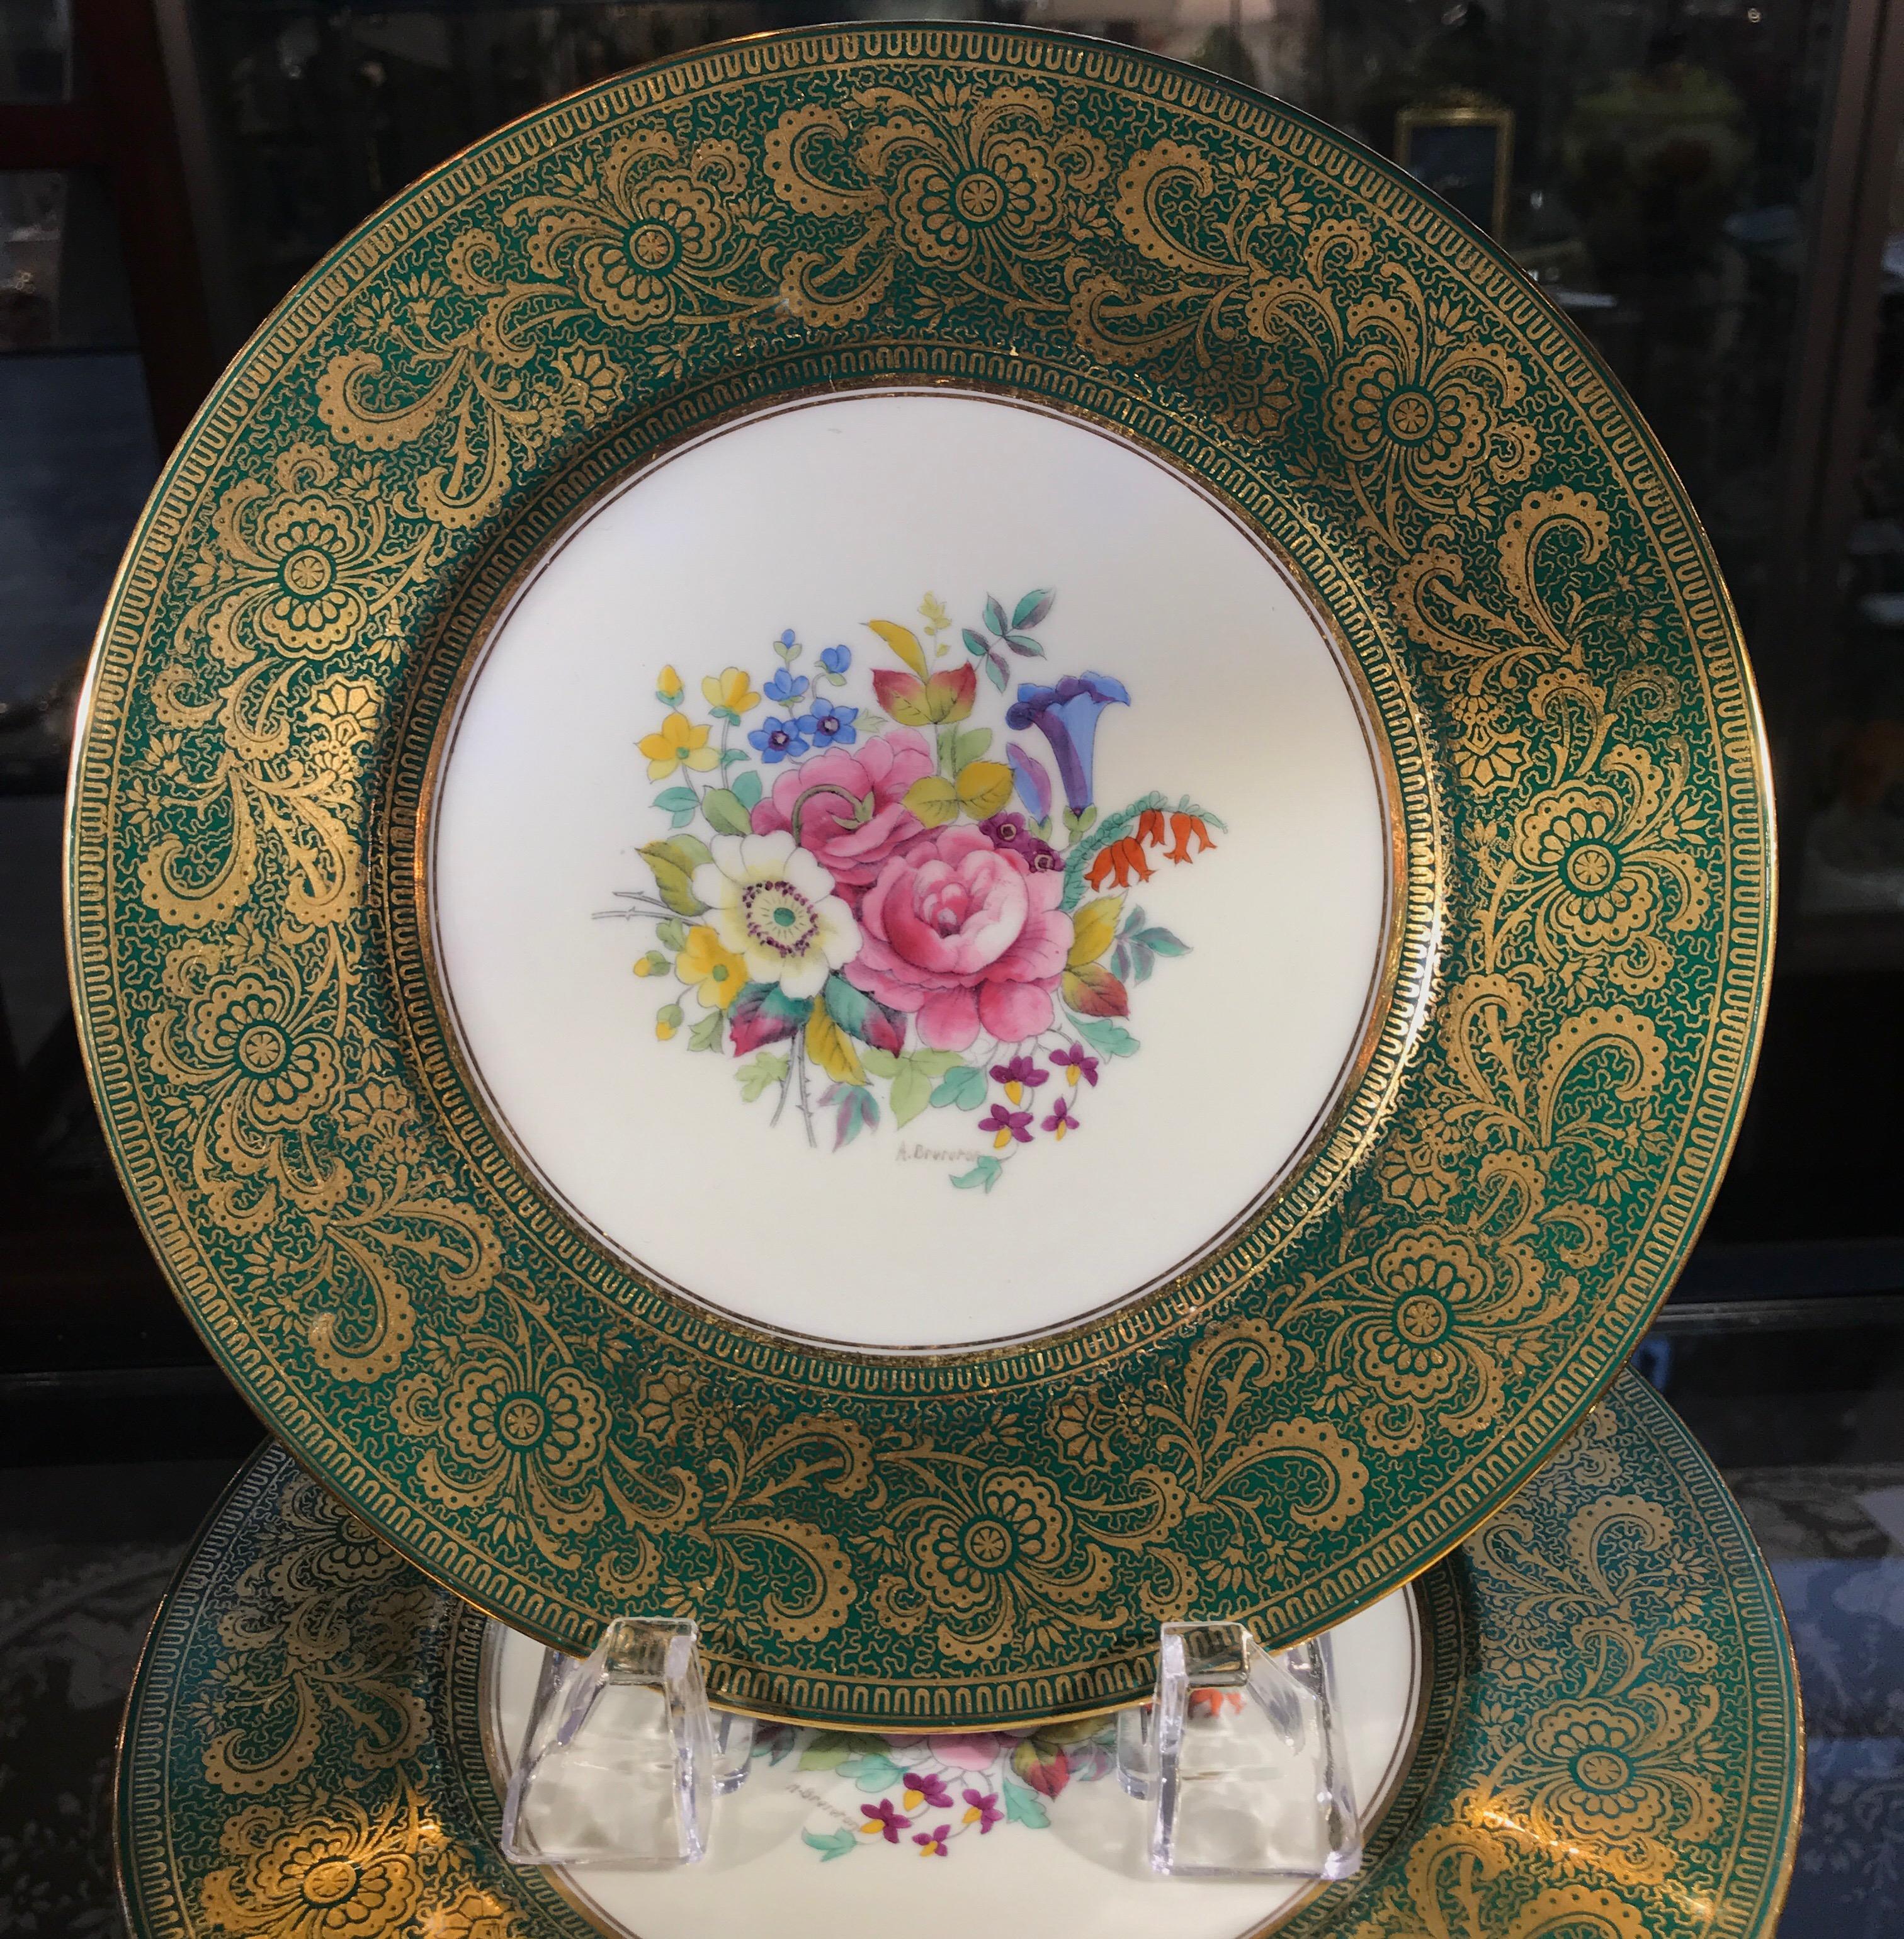 A set of 12, 9 inch accent plates for Tiffany & Co. made by Cauldon in England, circa 1910. The elaborate gold scrolling borders with Harrods green background with hand painted central floral bouquet signed by the artist A. Brereton on the lower